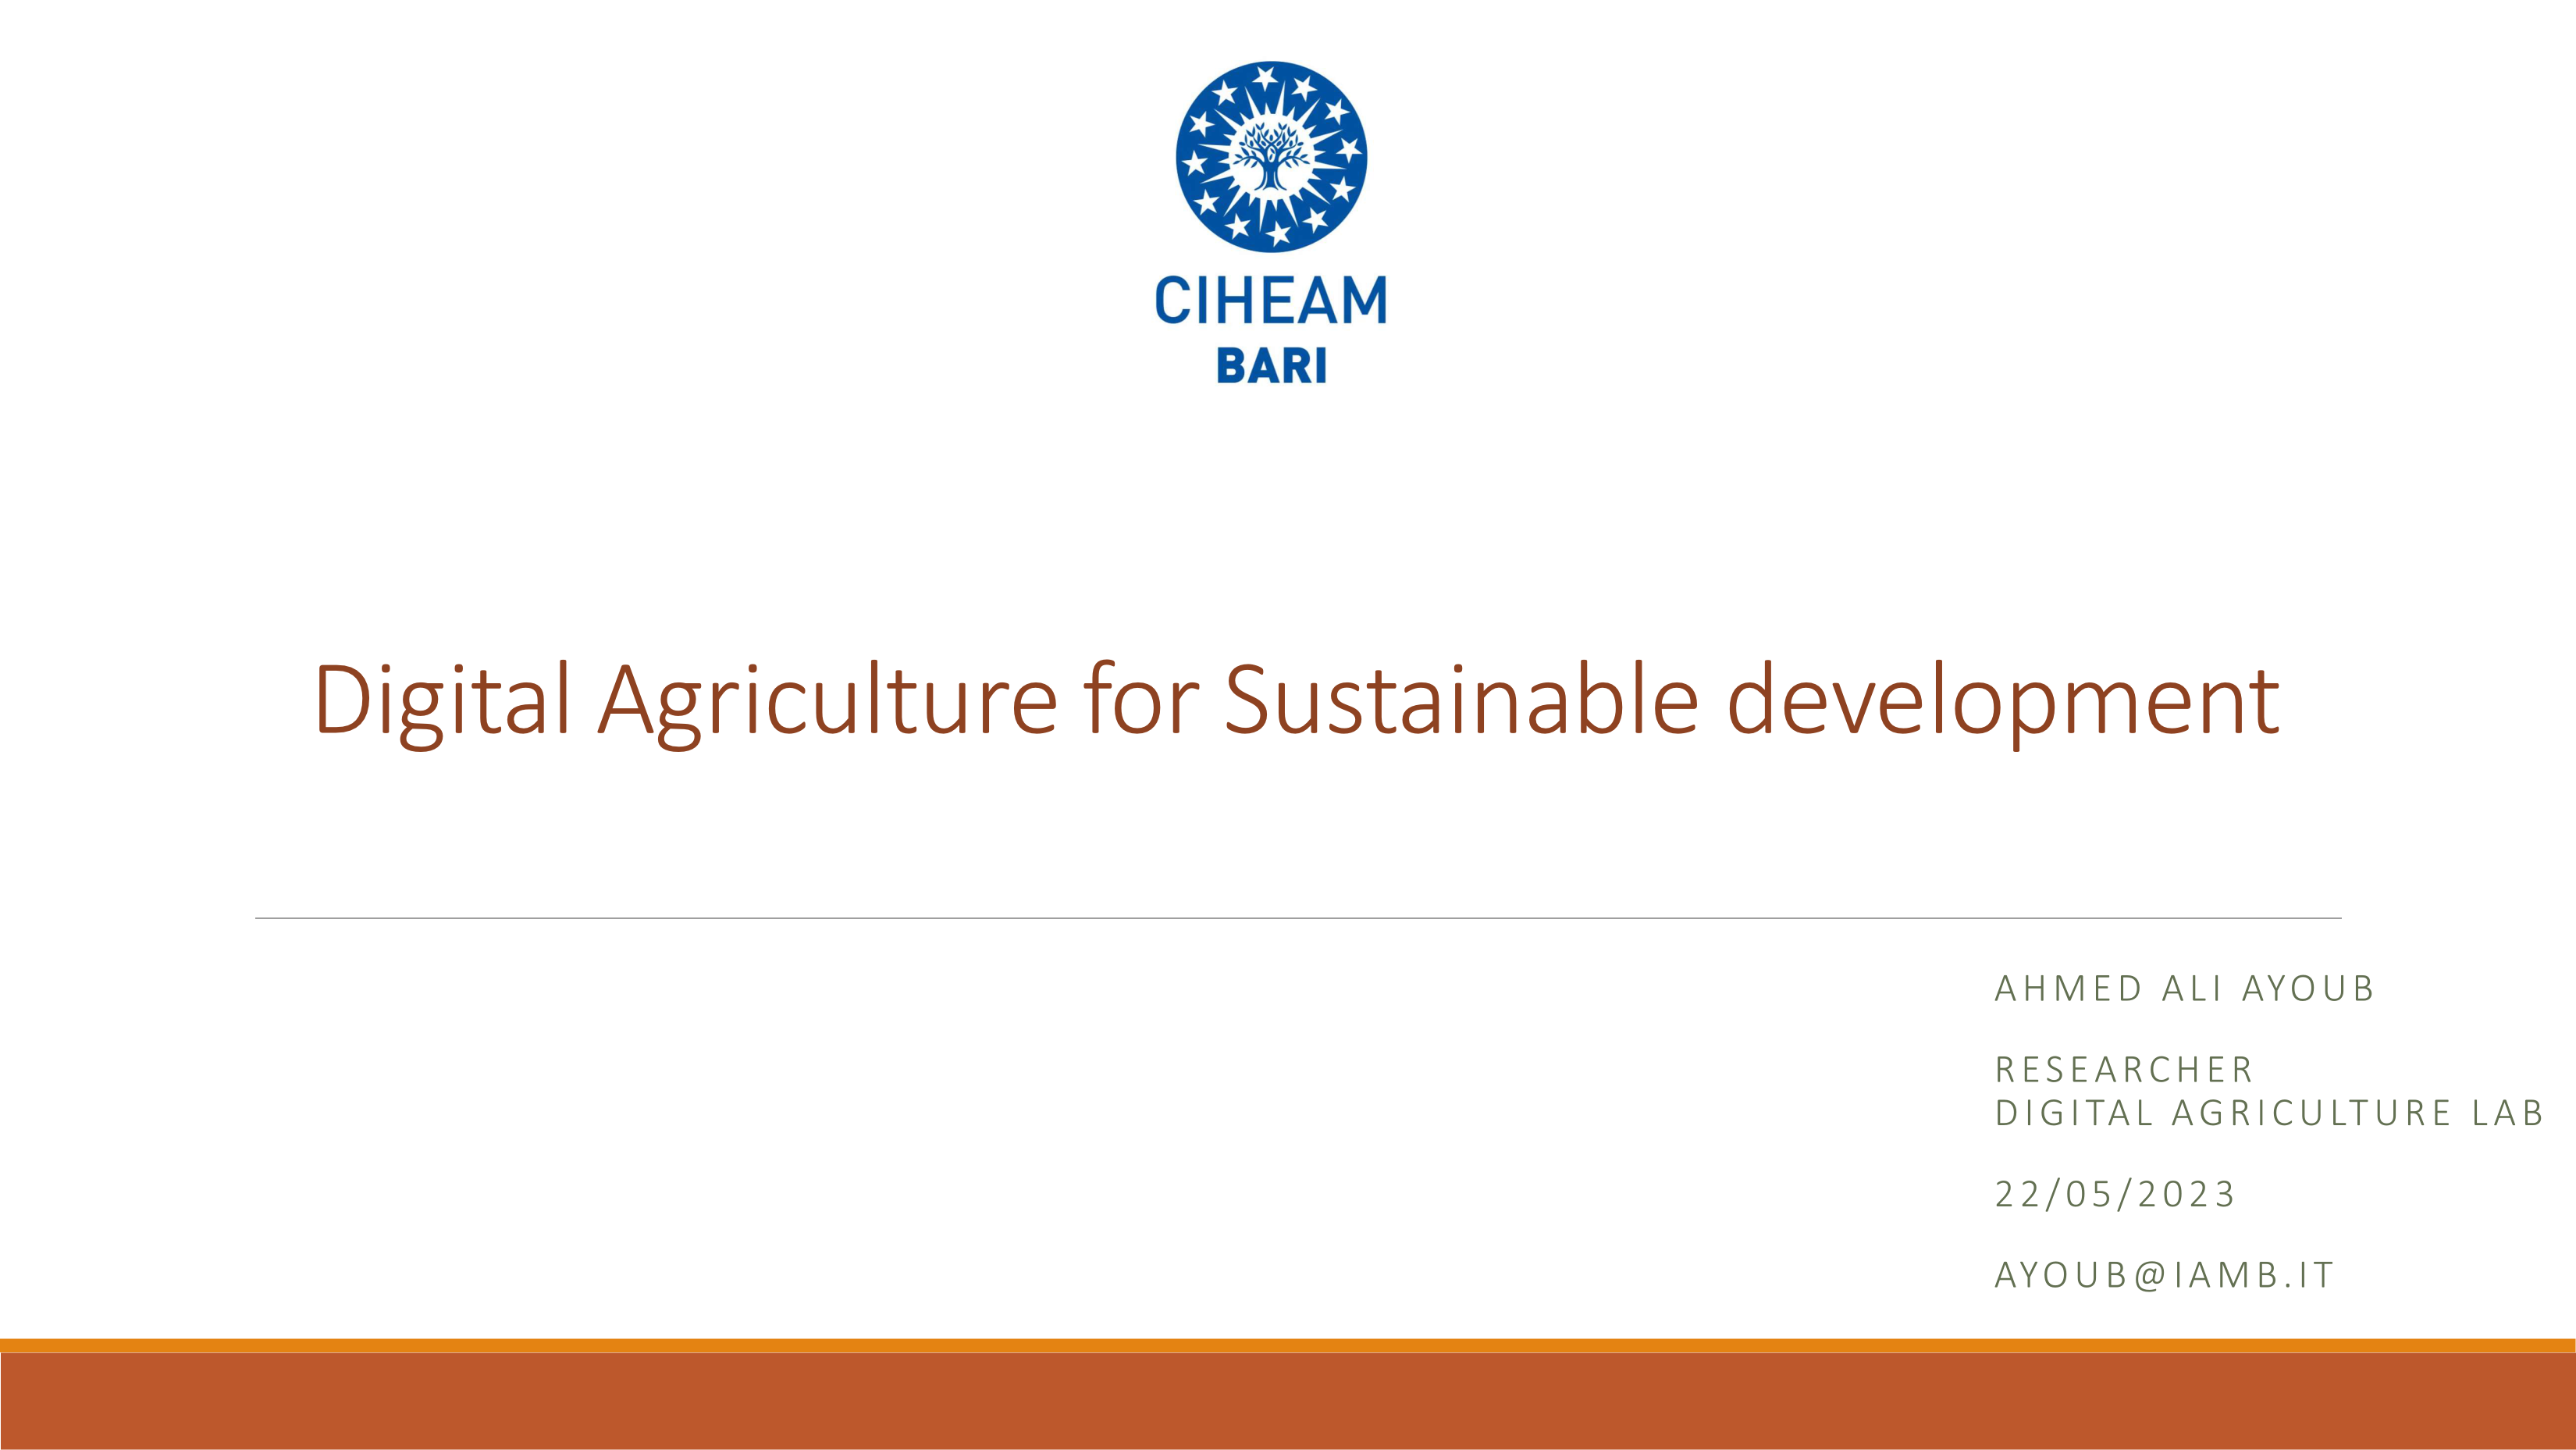 Digital agriculture for sustainable development